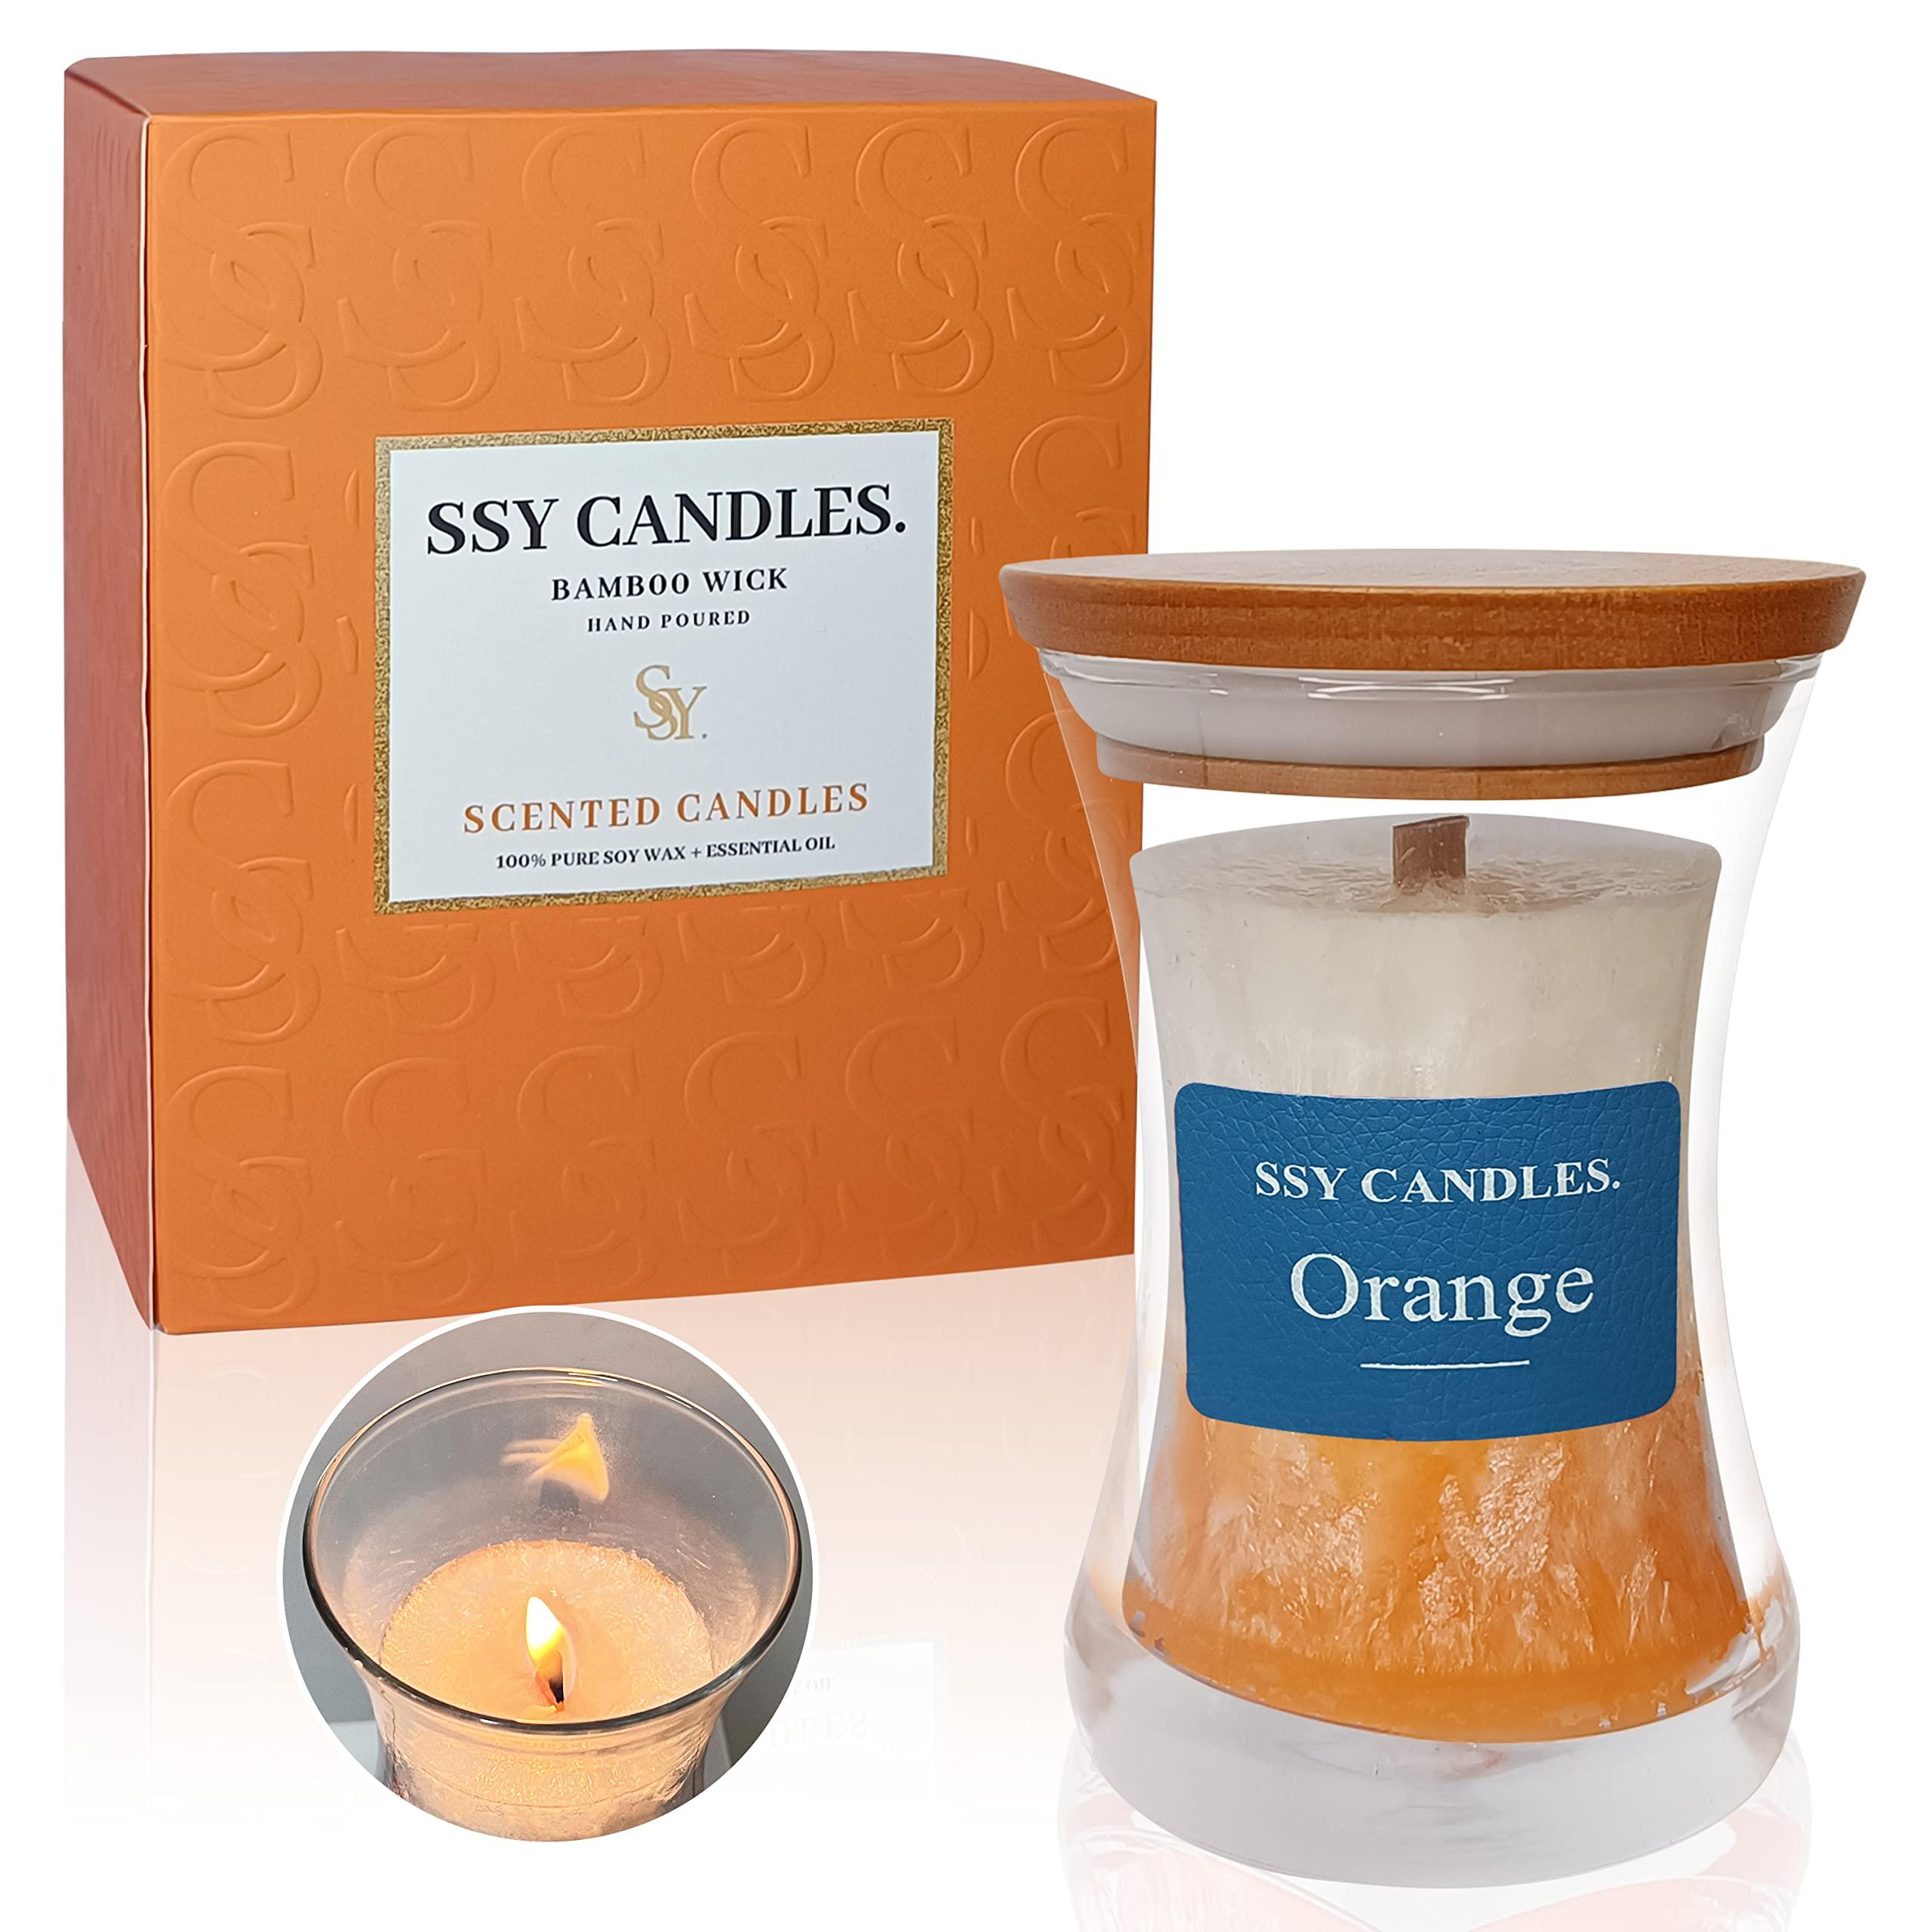 Experience Relaxation with Our Scented Jar Candle - 100% Natural Soy Wax, Burns up to 45 Hours, Aromatherapy Candle Gift for Any Occasion (#3 Single Violets) 0